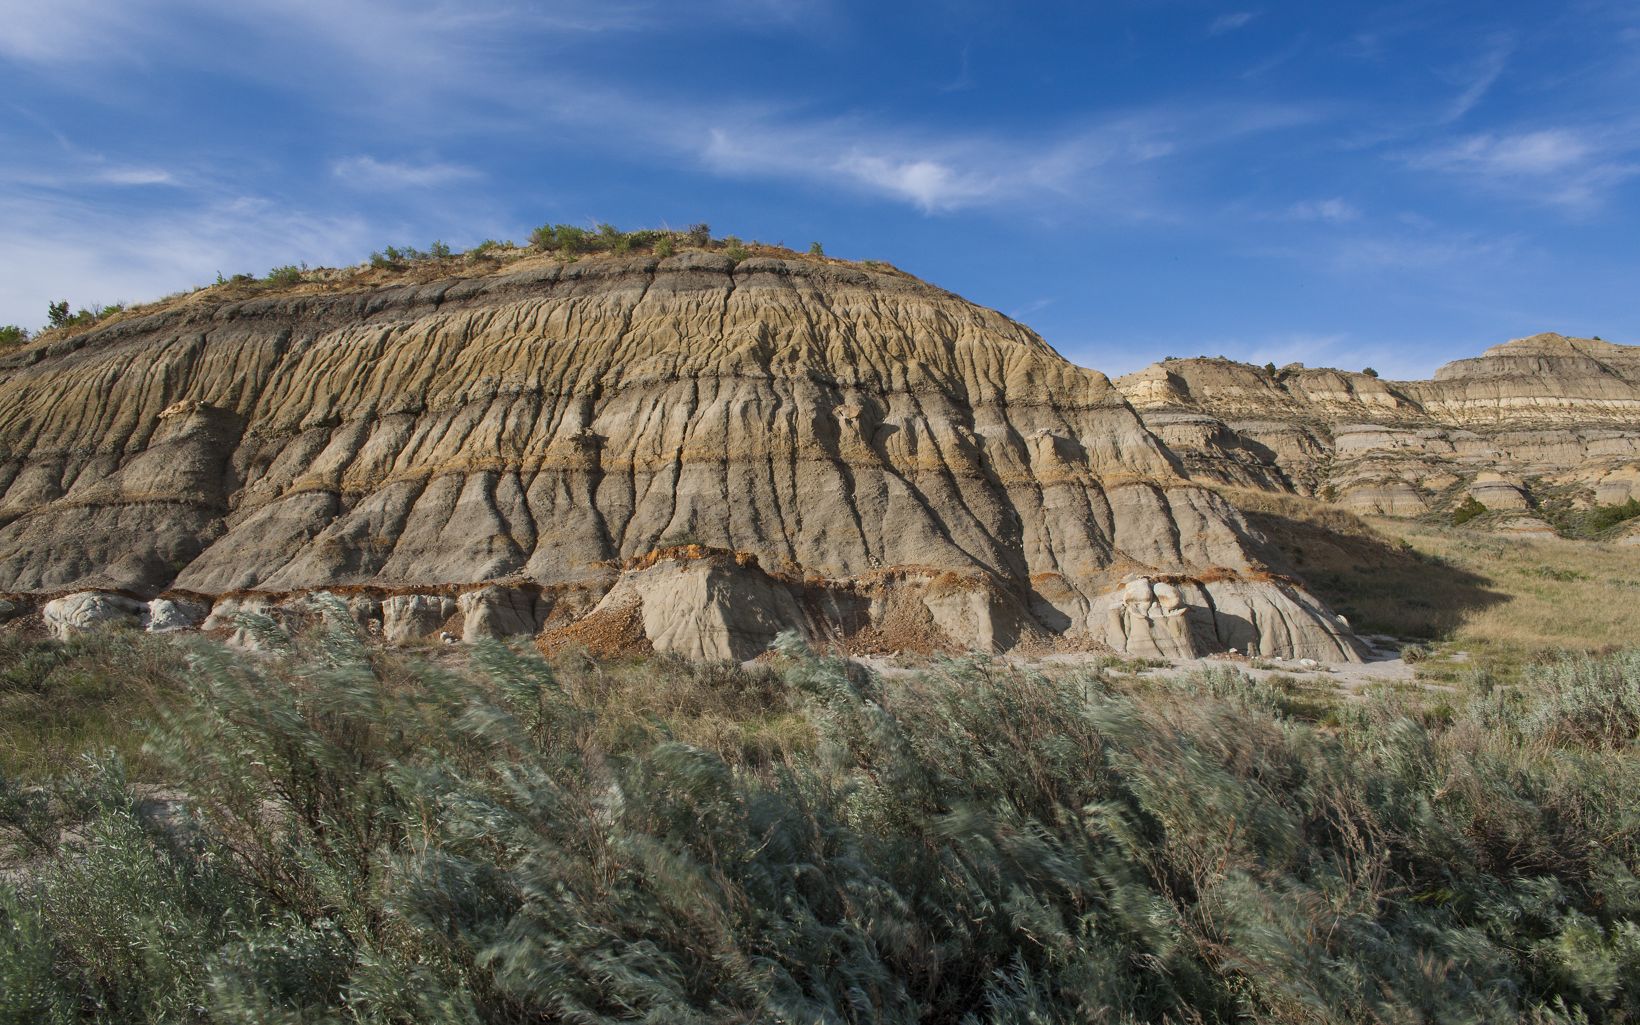 Rock Formations As part of the Badlands, Theodore Roosevelt National Park boats some seriously cool geologic formations. © ©2012 Richard Hamilton Smith